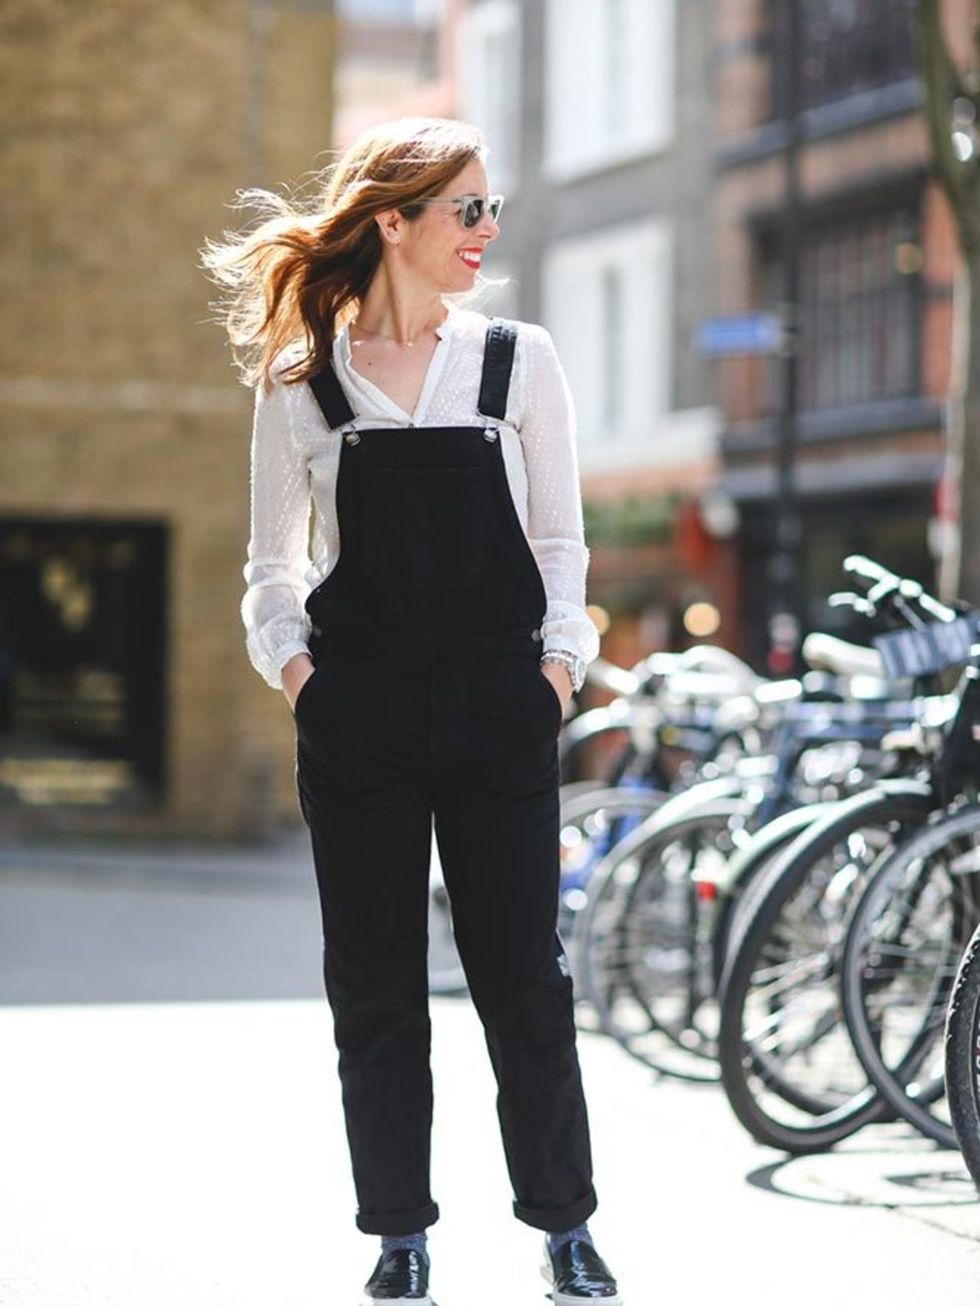 <p>Kirsty Dale, Executive Fashion & Beauty Director</p>

<p>Zara blouse, Gap dungarees, Russell & Bromley shoes, Topshop socks, Ray Ban sunglasses</p>